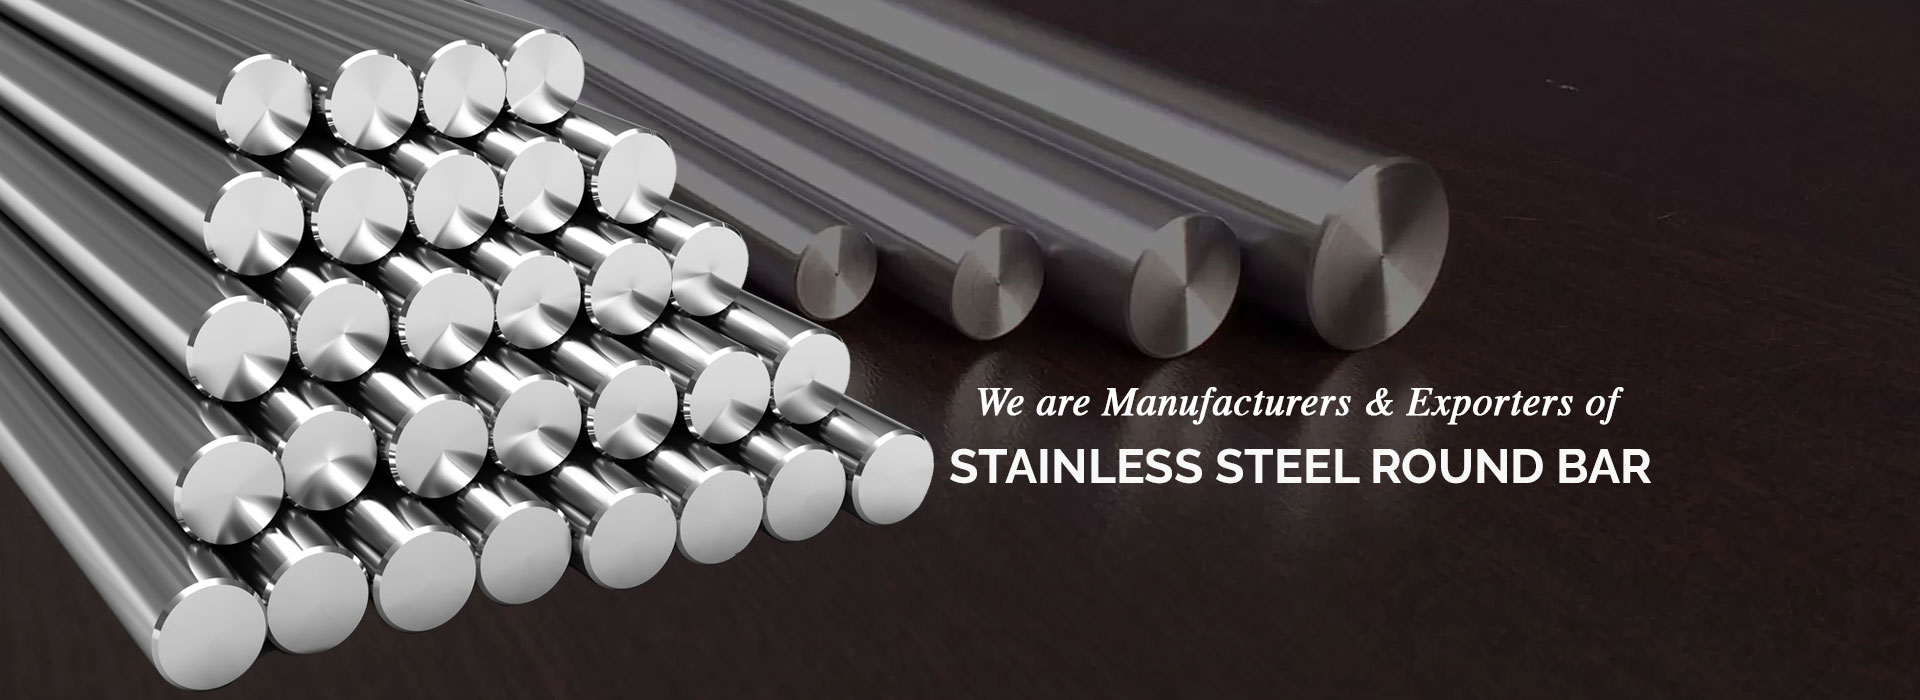 Stainless Steel Round Bar Manufacturers in China